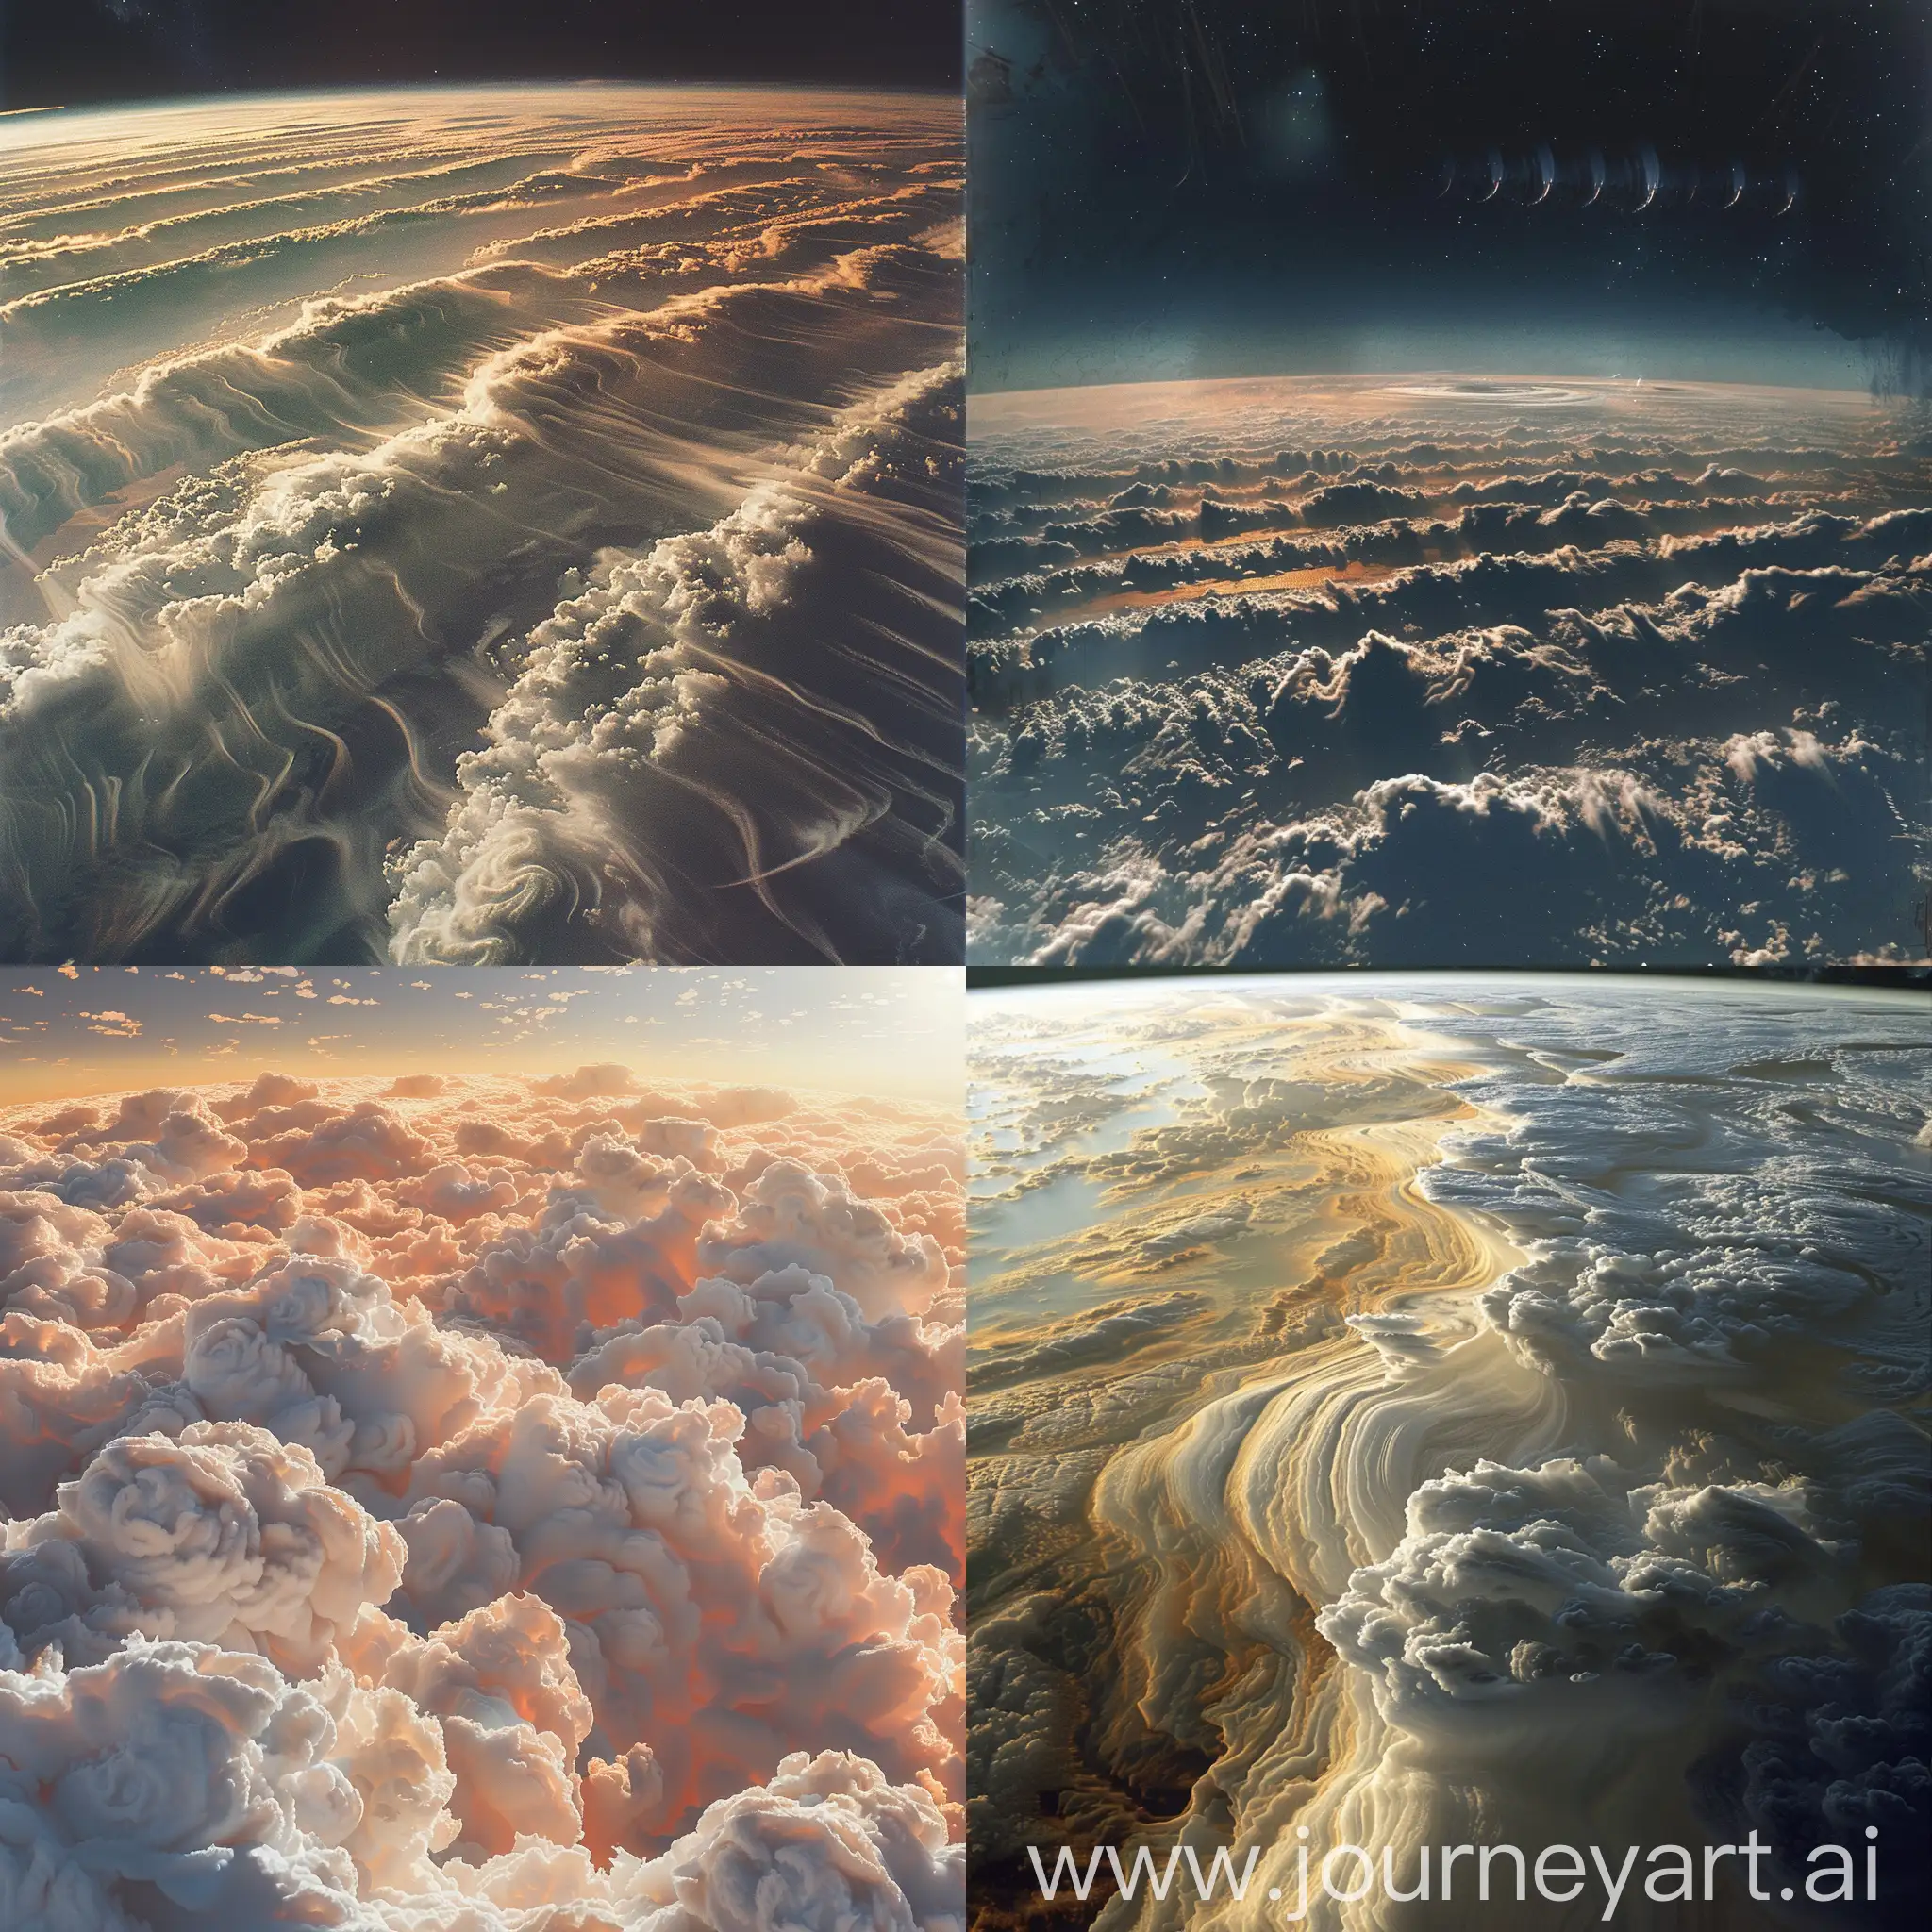 Photorealistic. A top-down view of white-orange clouds, stretching in stripes, swirls, and patterns, in a photorealistic style. The clouds have a unique appearance, not like those on Earth, and they are covered in a haze. Above, a dark azure sky faintly extends towards the horizon. The sunlight here is 27 times weaker than on Earth, resembling twilight. Otherworldly, ethereal, surreal, dreamlike, atmospheric, serene, cosmic, mystical. Inspired by the works of Alex Andreev, Simon Stålenhag, and surrealism. hyper-realistic detail, atmospheric perspective, soft lighting, subtle textures, volumetric clouds, high dynamic range, color correction